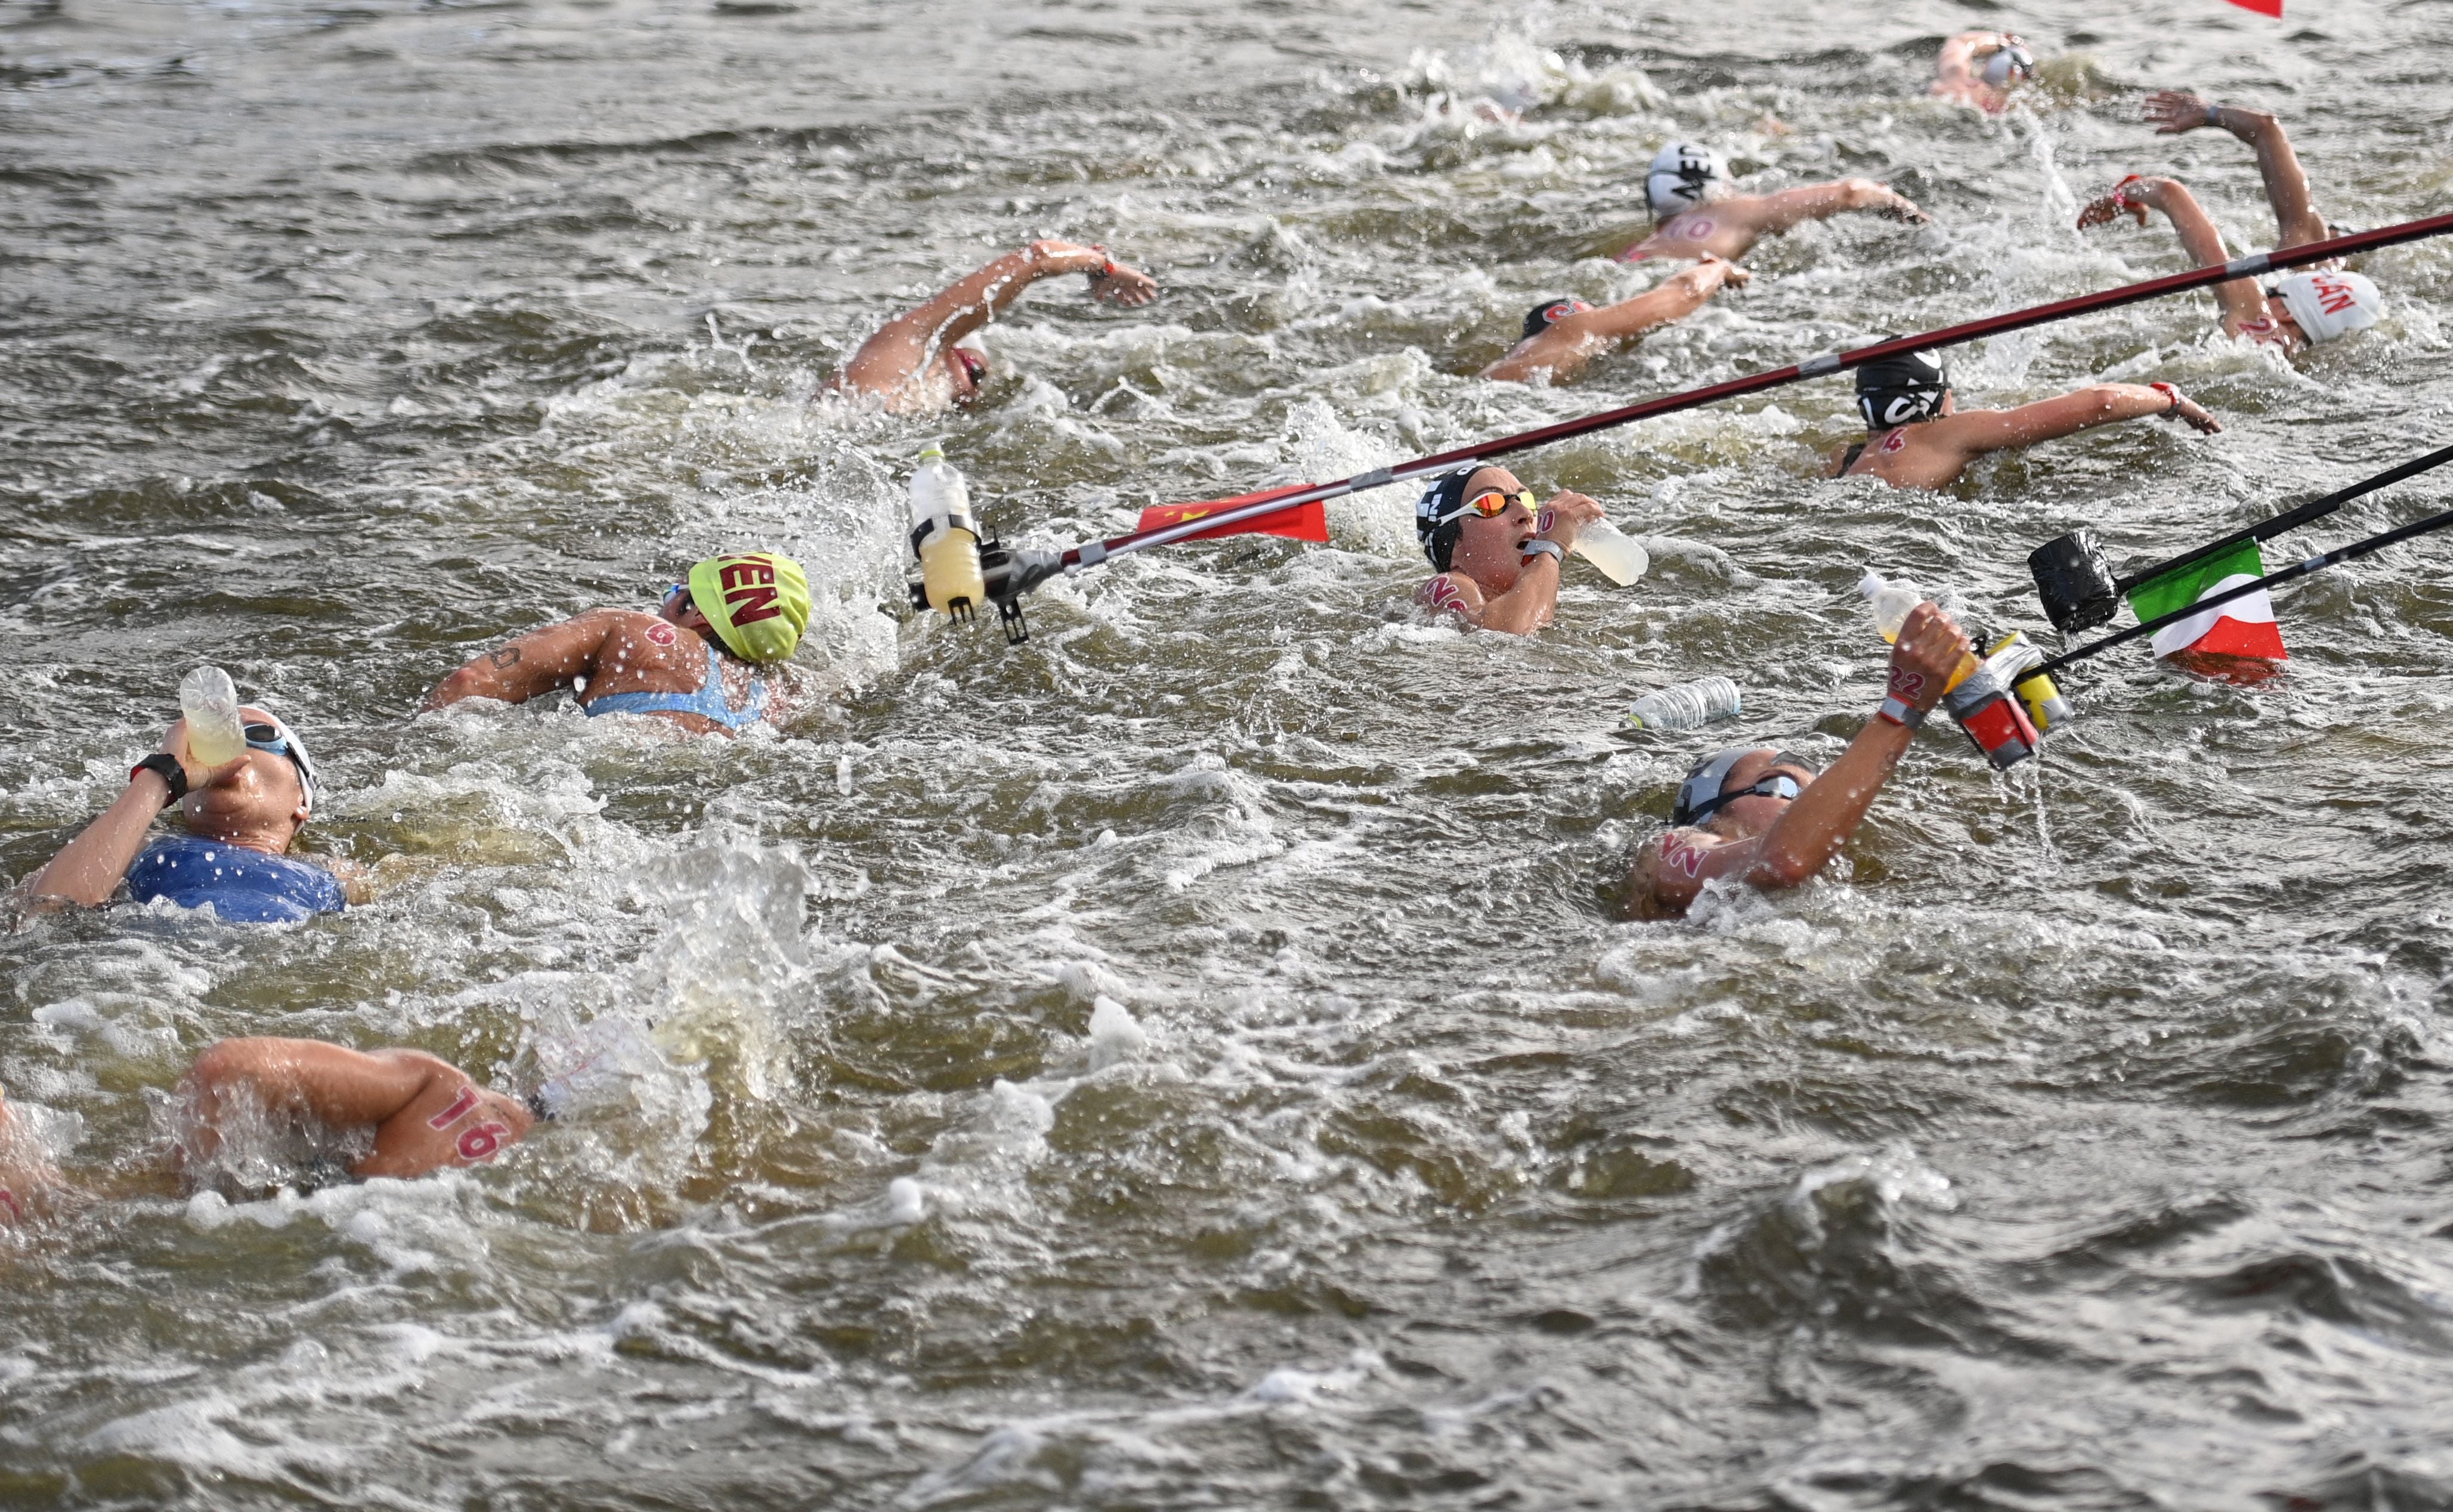 Competitors take refreshments at a feed station in the women's 10km marathon swimming event during the Tokyo 2020 Olympic Games at the Odaiba Marine Park in Tokyo on August 4, 2021.